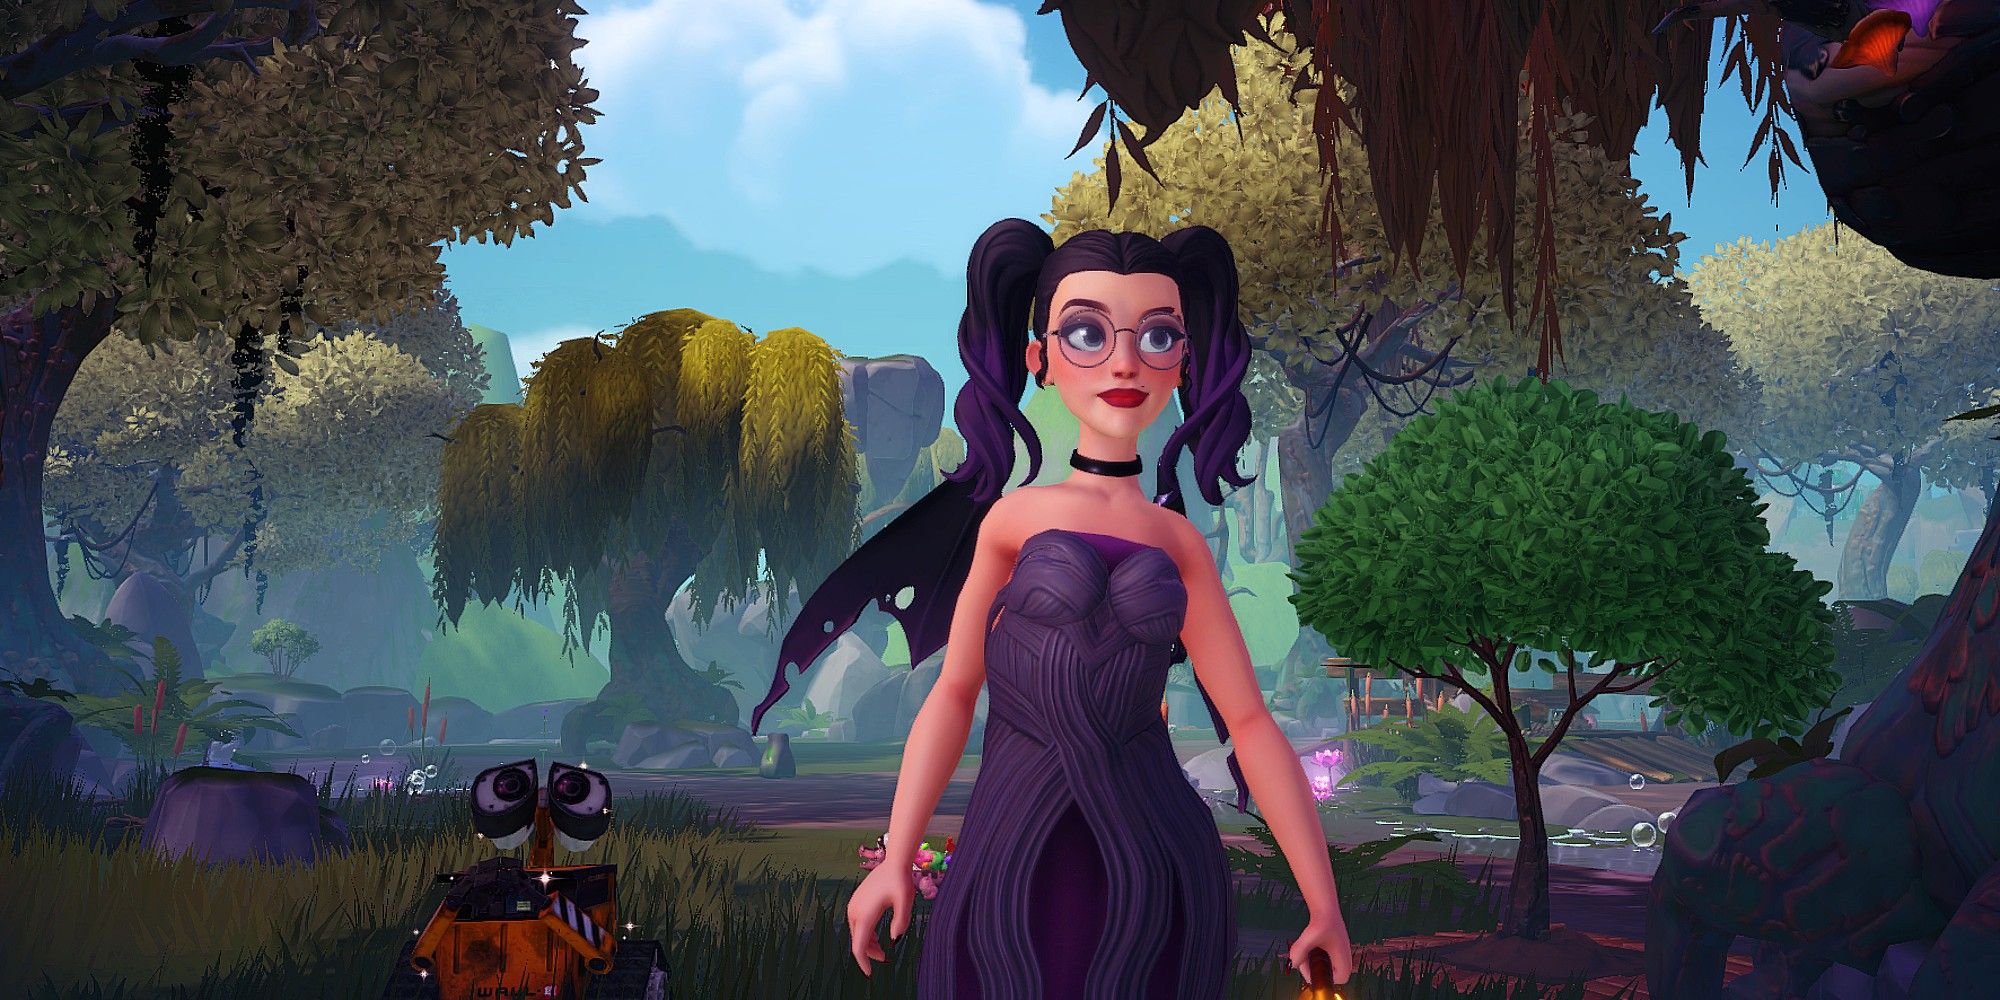 The Founder stands in the Glade of Trust, one of the more unique landscapes in Disney Dreamlight Valley